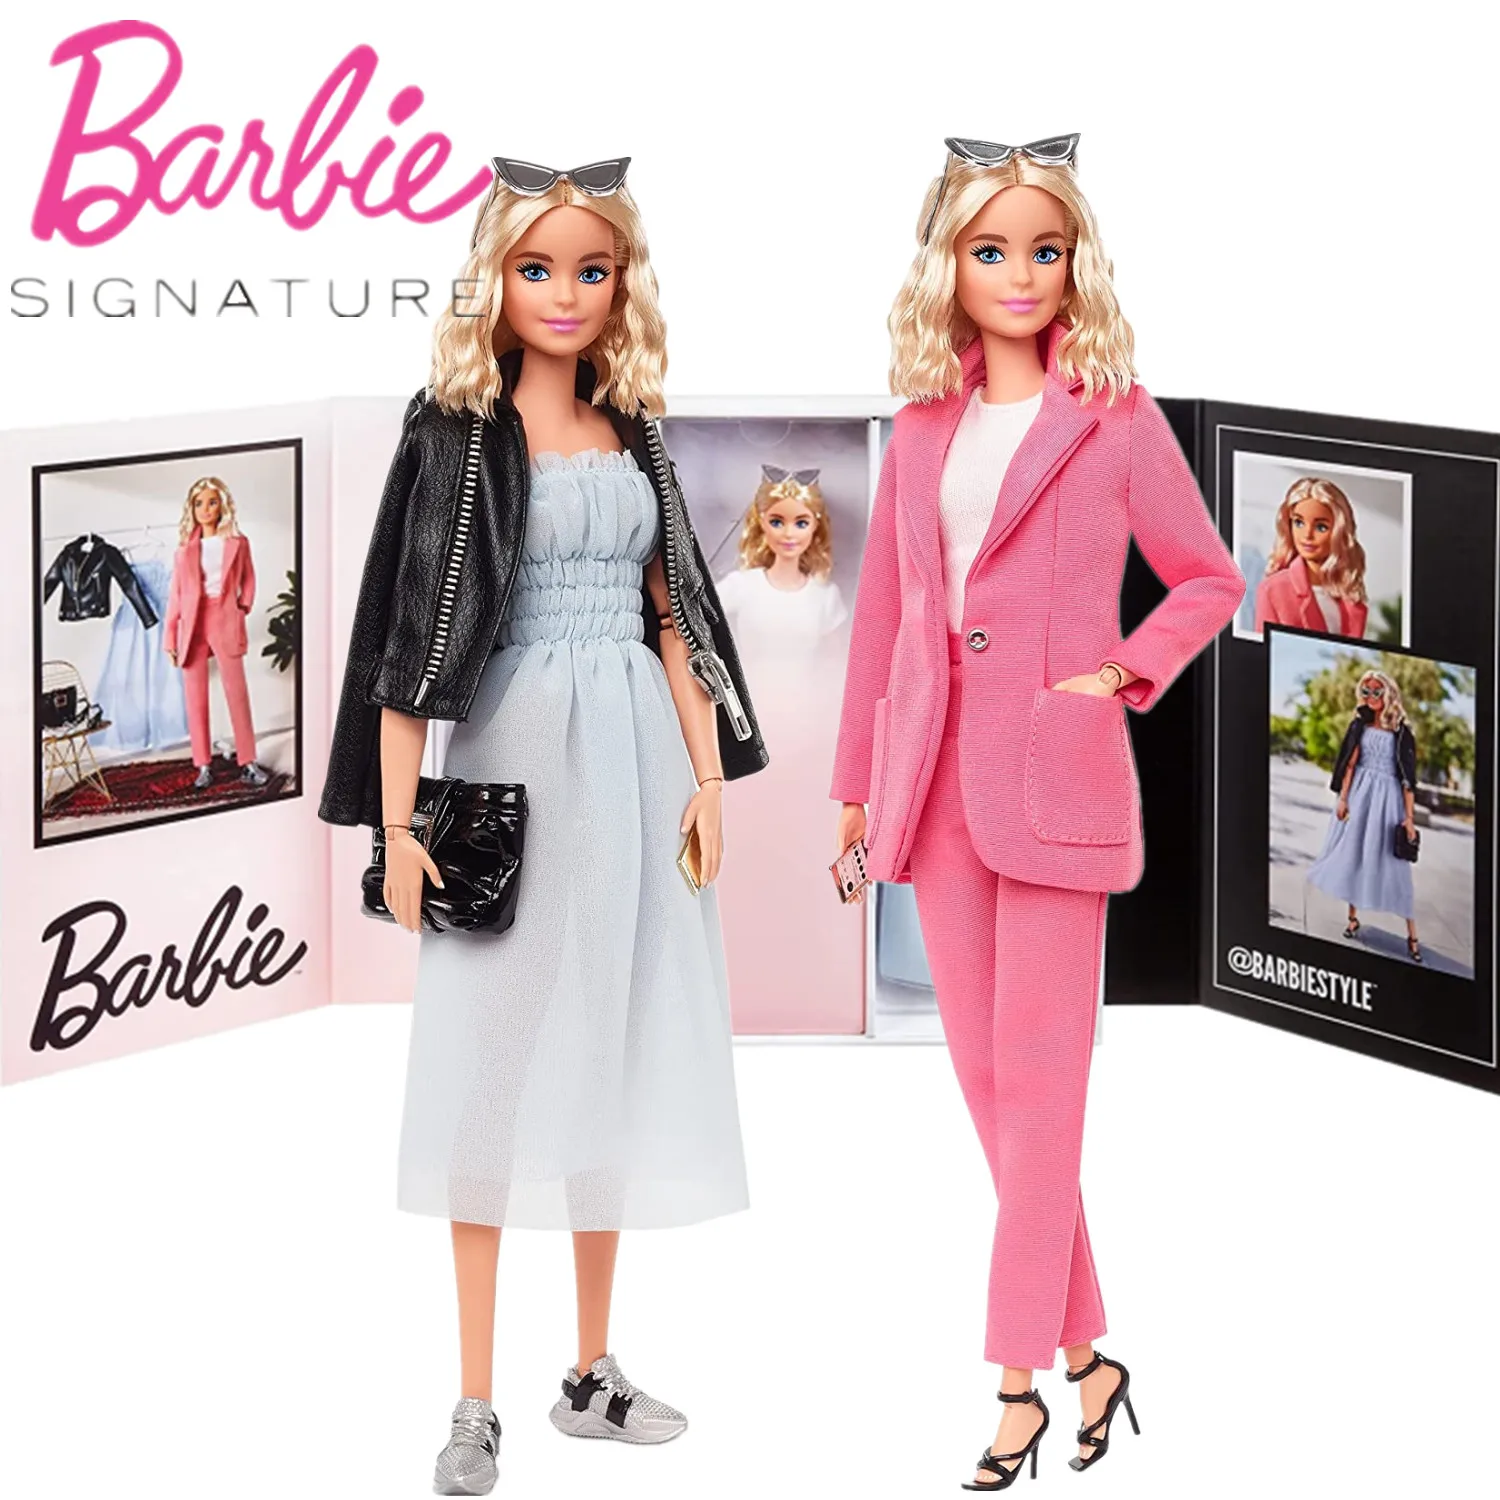 

Barbie Signature Barbie Style Doll Joints Move Fashion Doll With Accessories Limited Edition Toy Collectors Collectible Gift